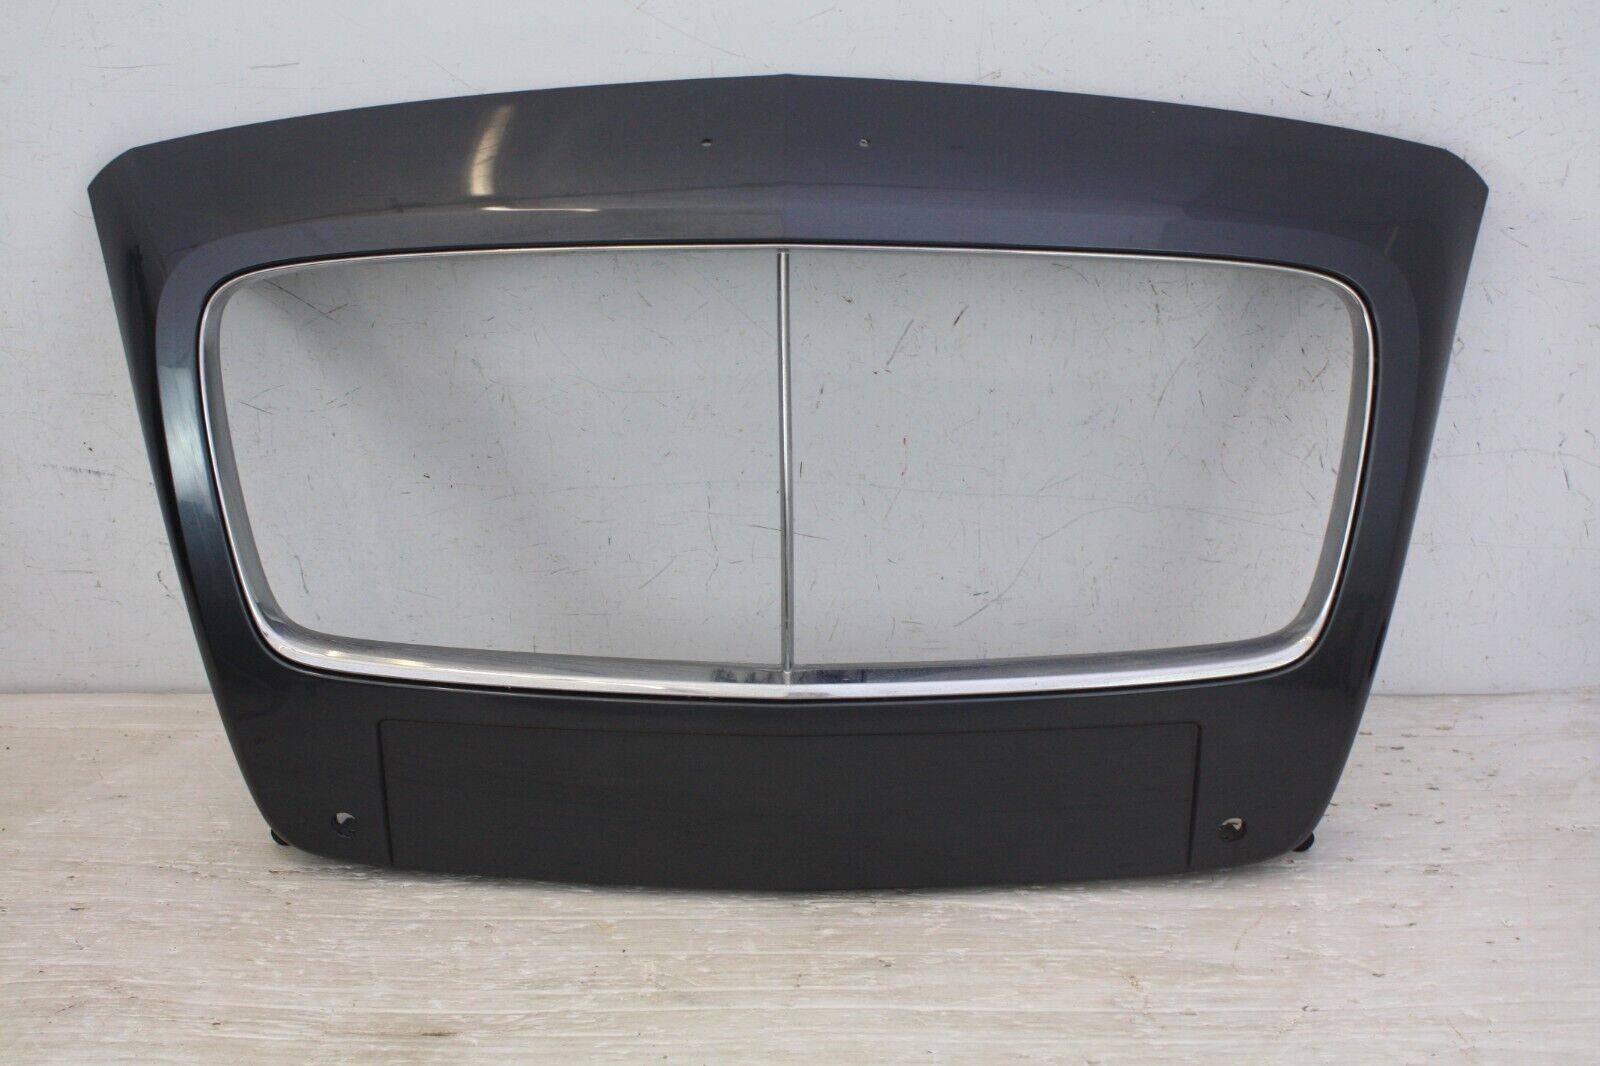 Bentley Continental GT GTC Front Grill Surround 3W3853653 Genuine 2011 175913121734